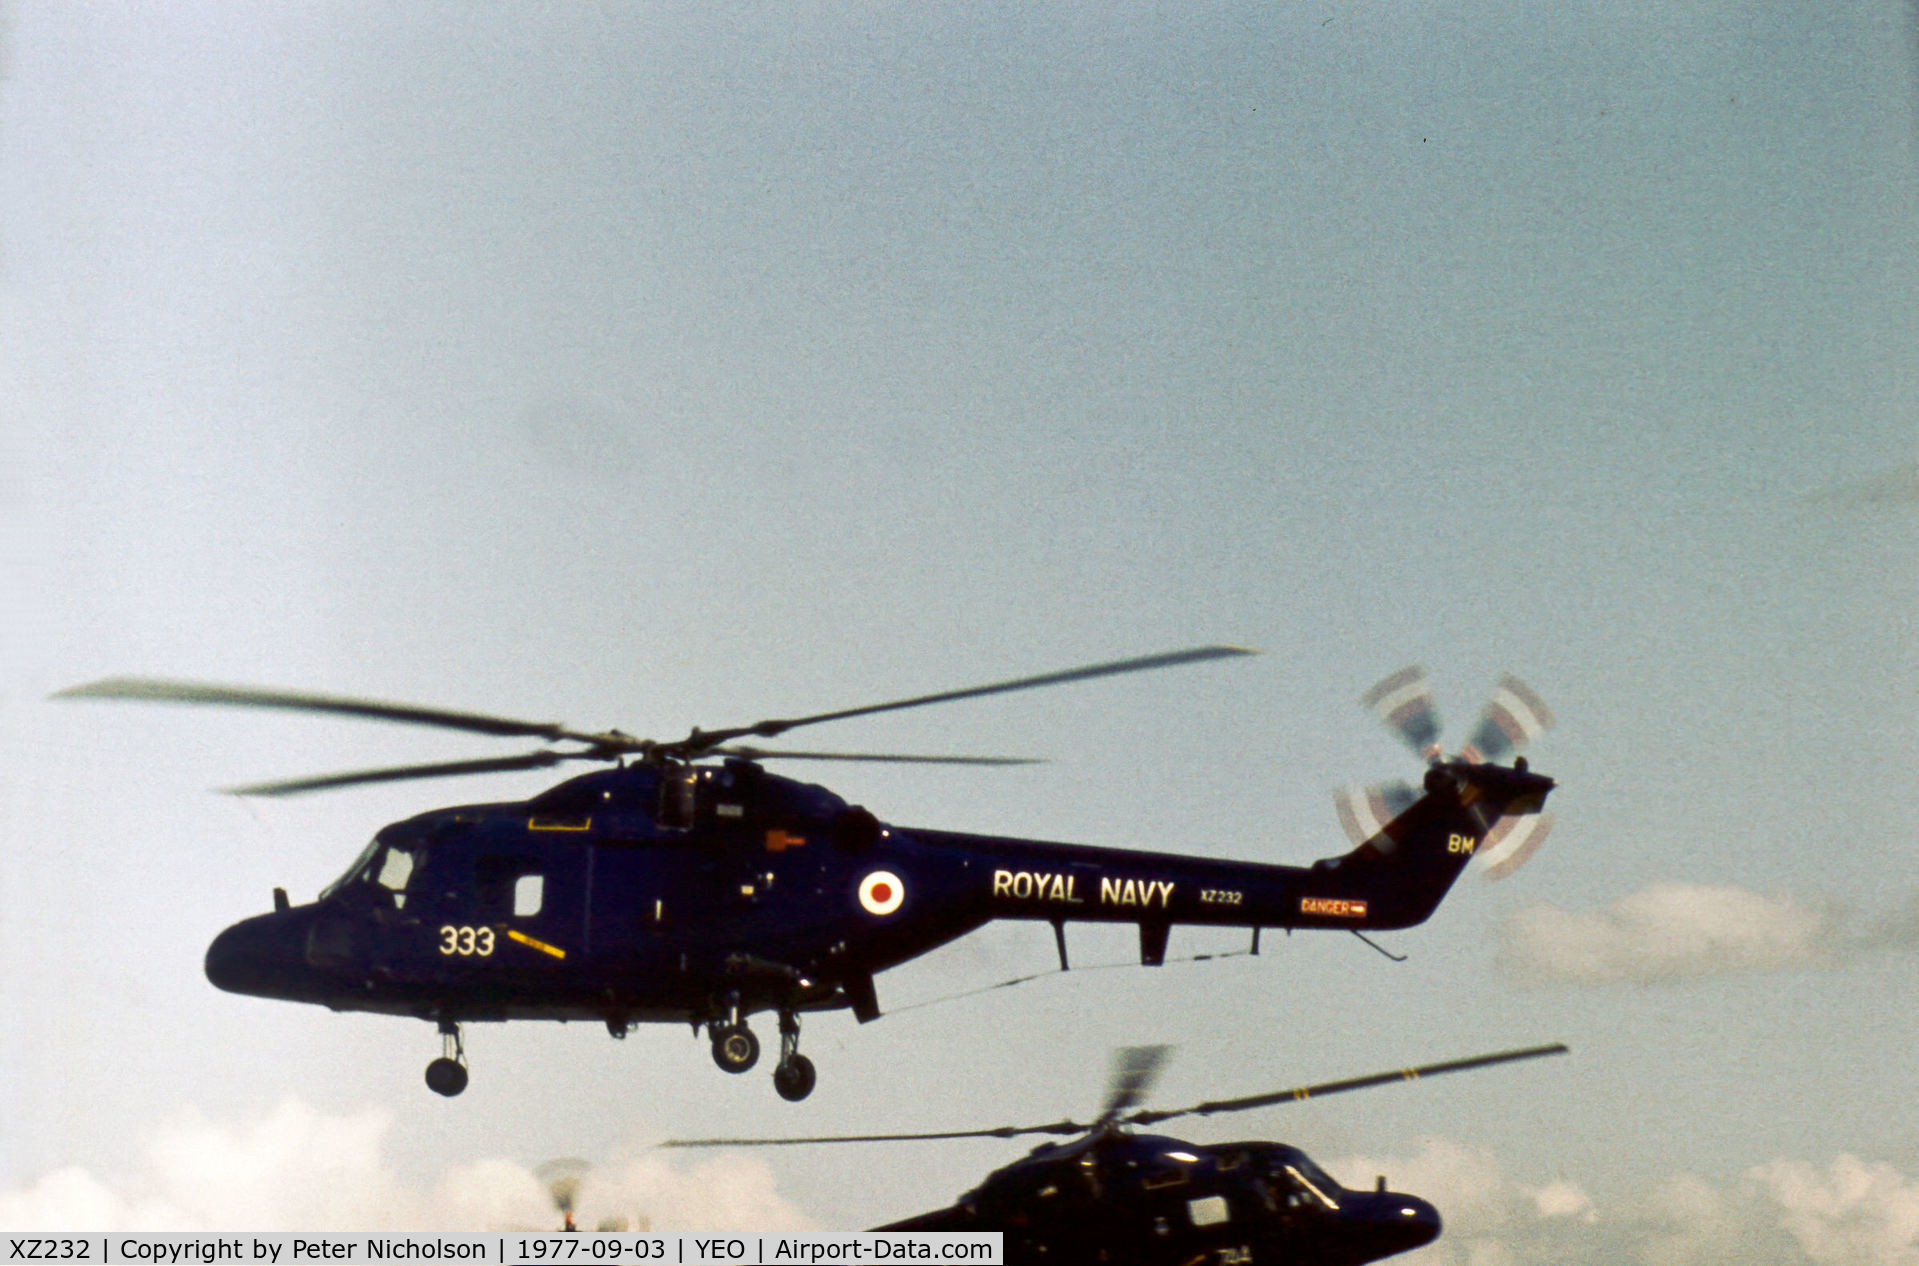 XZ232, 1977 Westland Lynx HAS.2 C/N 009, Lynx HAS.2 of 700L Squadron in action at the 1977 RNAS Yeovilton Airshow.